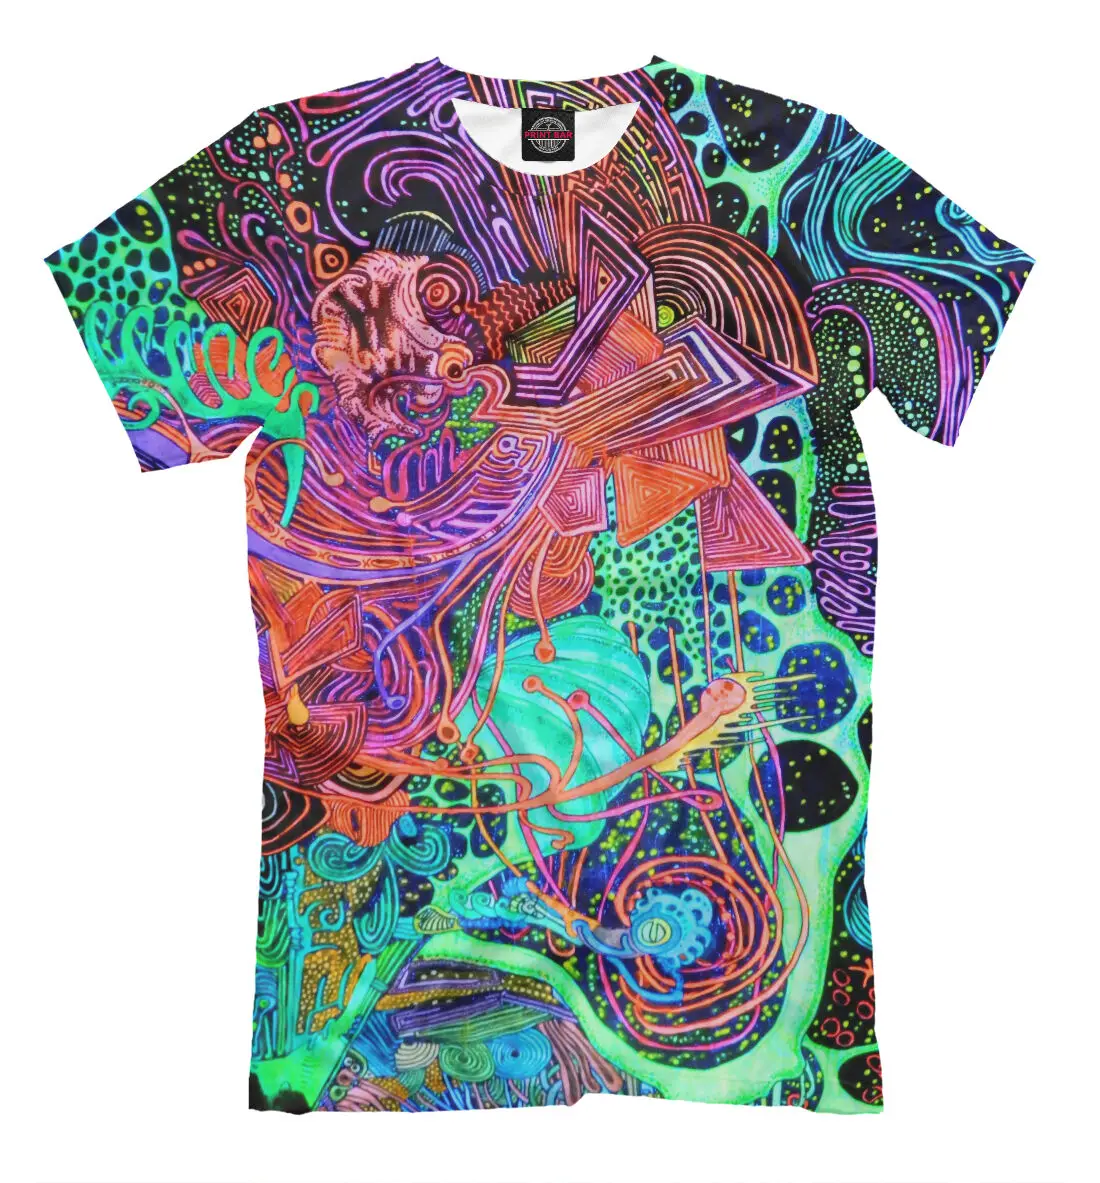 Acid Skin All Over Print Lsd Tee Colorful Psychedelic T Shirt Edm Chemical - Buy Skin All Over Print Tee Colorful Psychedelic T Shirt Edm Chemical Fun,Acid Skin All